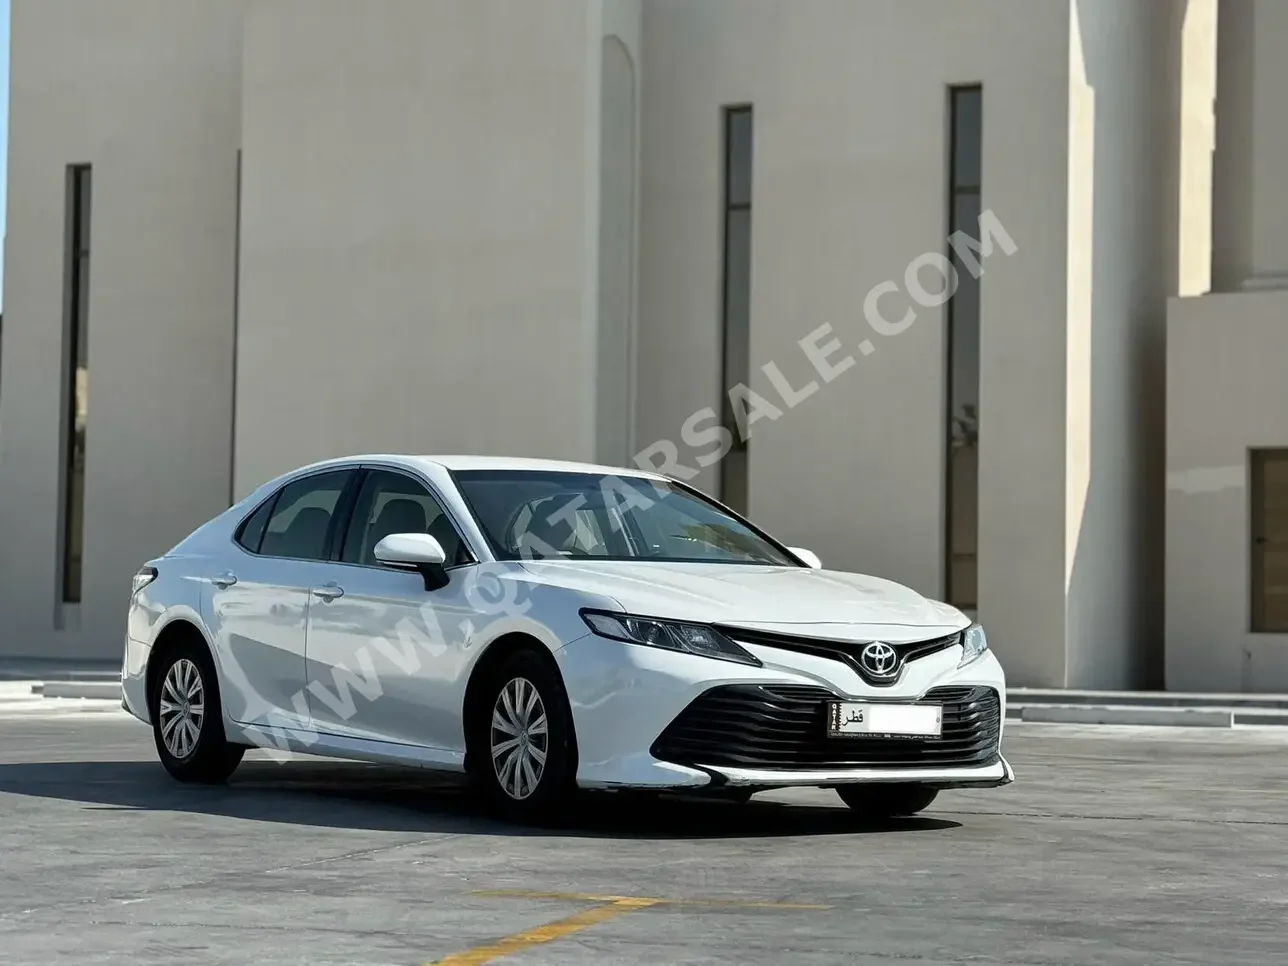 Toyota  Camry  LE  2019  Automatic  106,000 Km  4 Cylinder  Front Wheel Drive (FWD)  Sedan  White